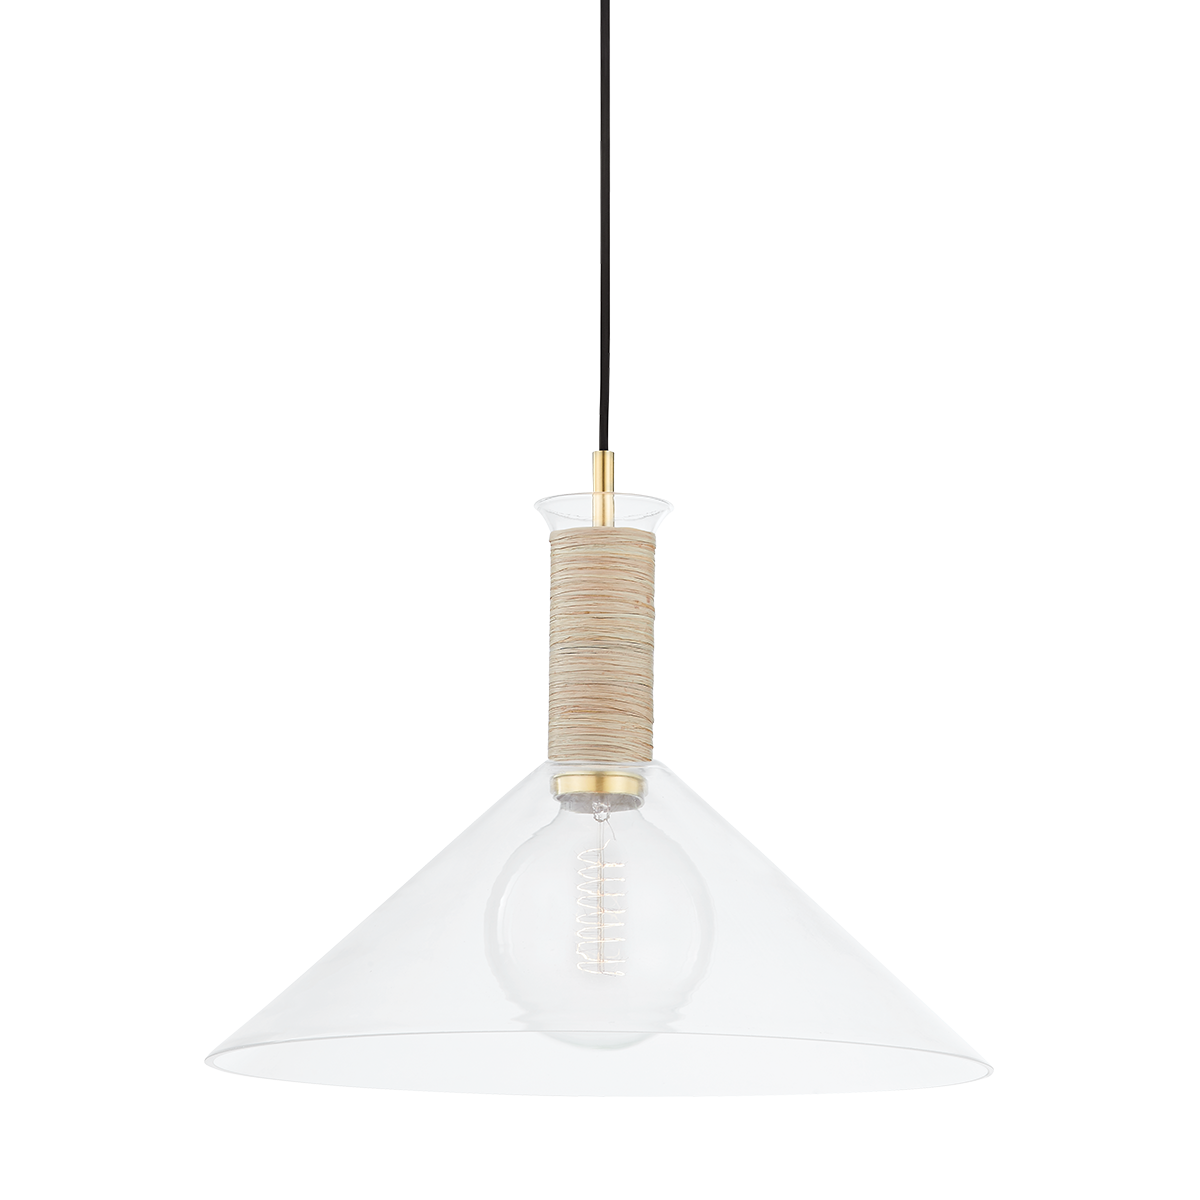 The Besa Ceiling Light uses a cone-shaped shade in clear glass that lets brilliant, bright light shine through.